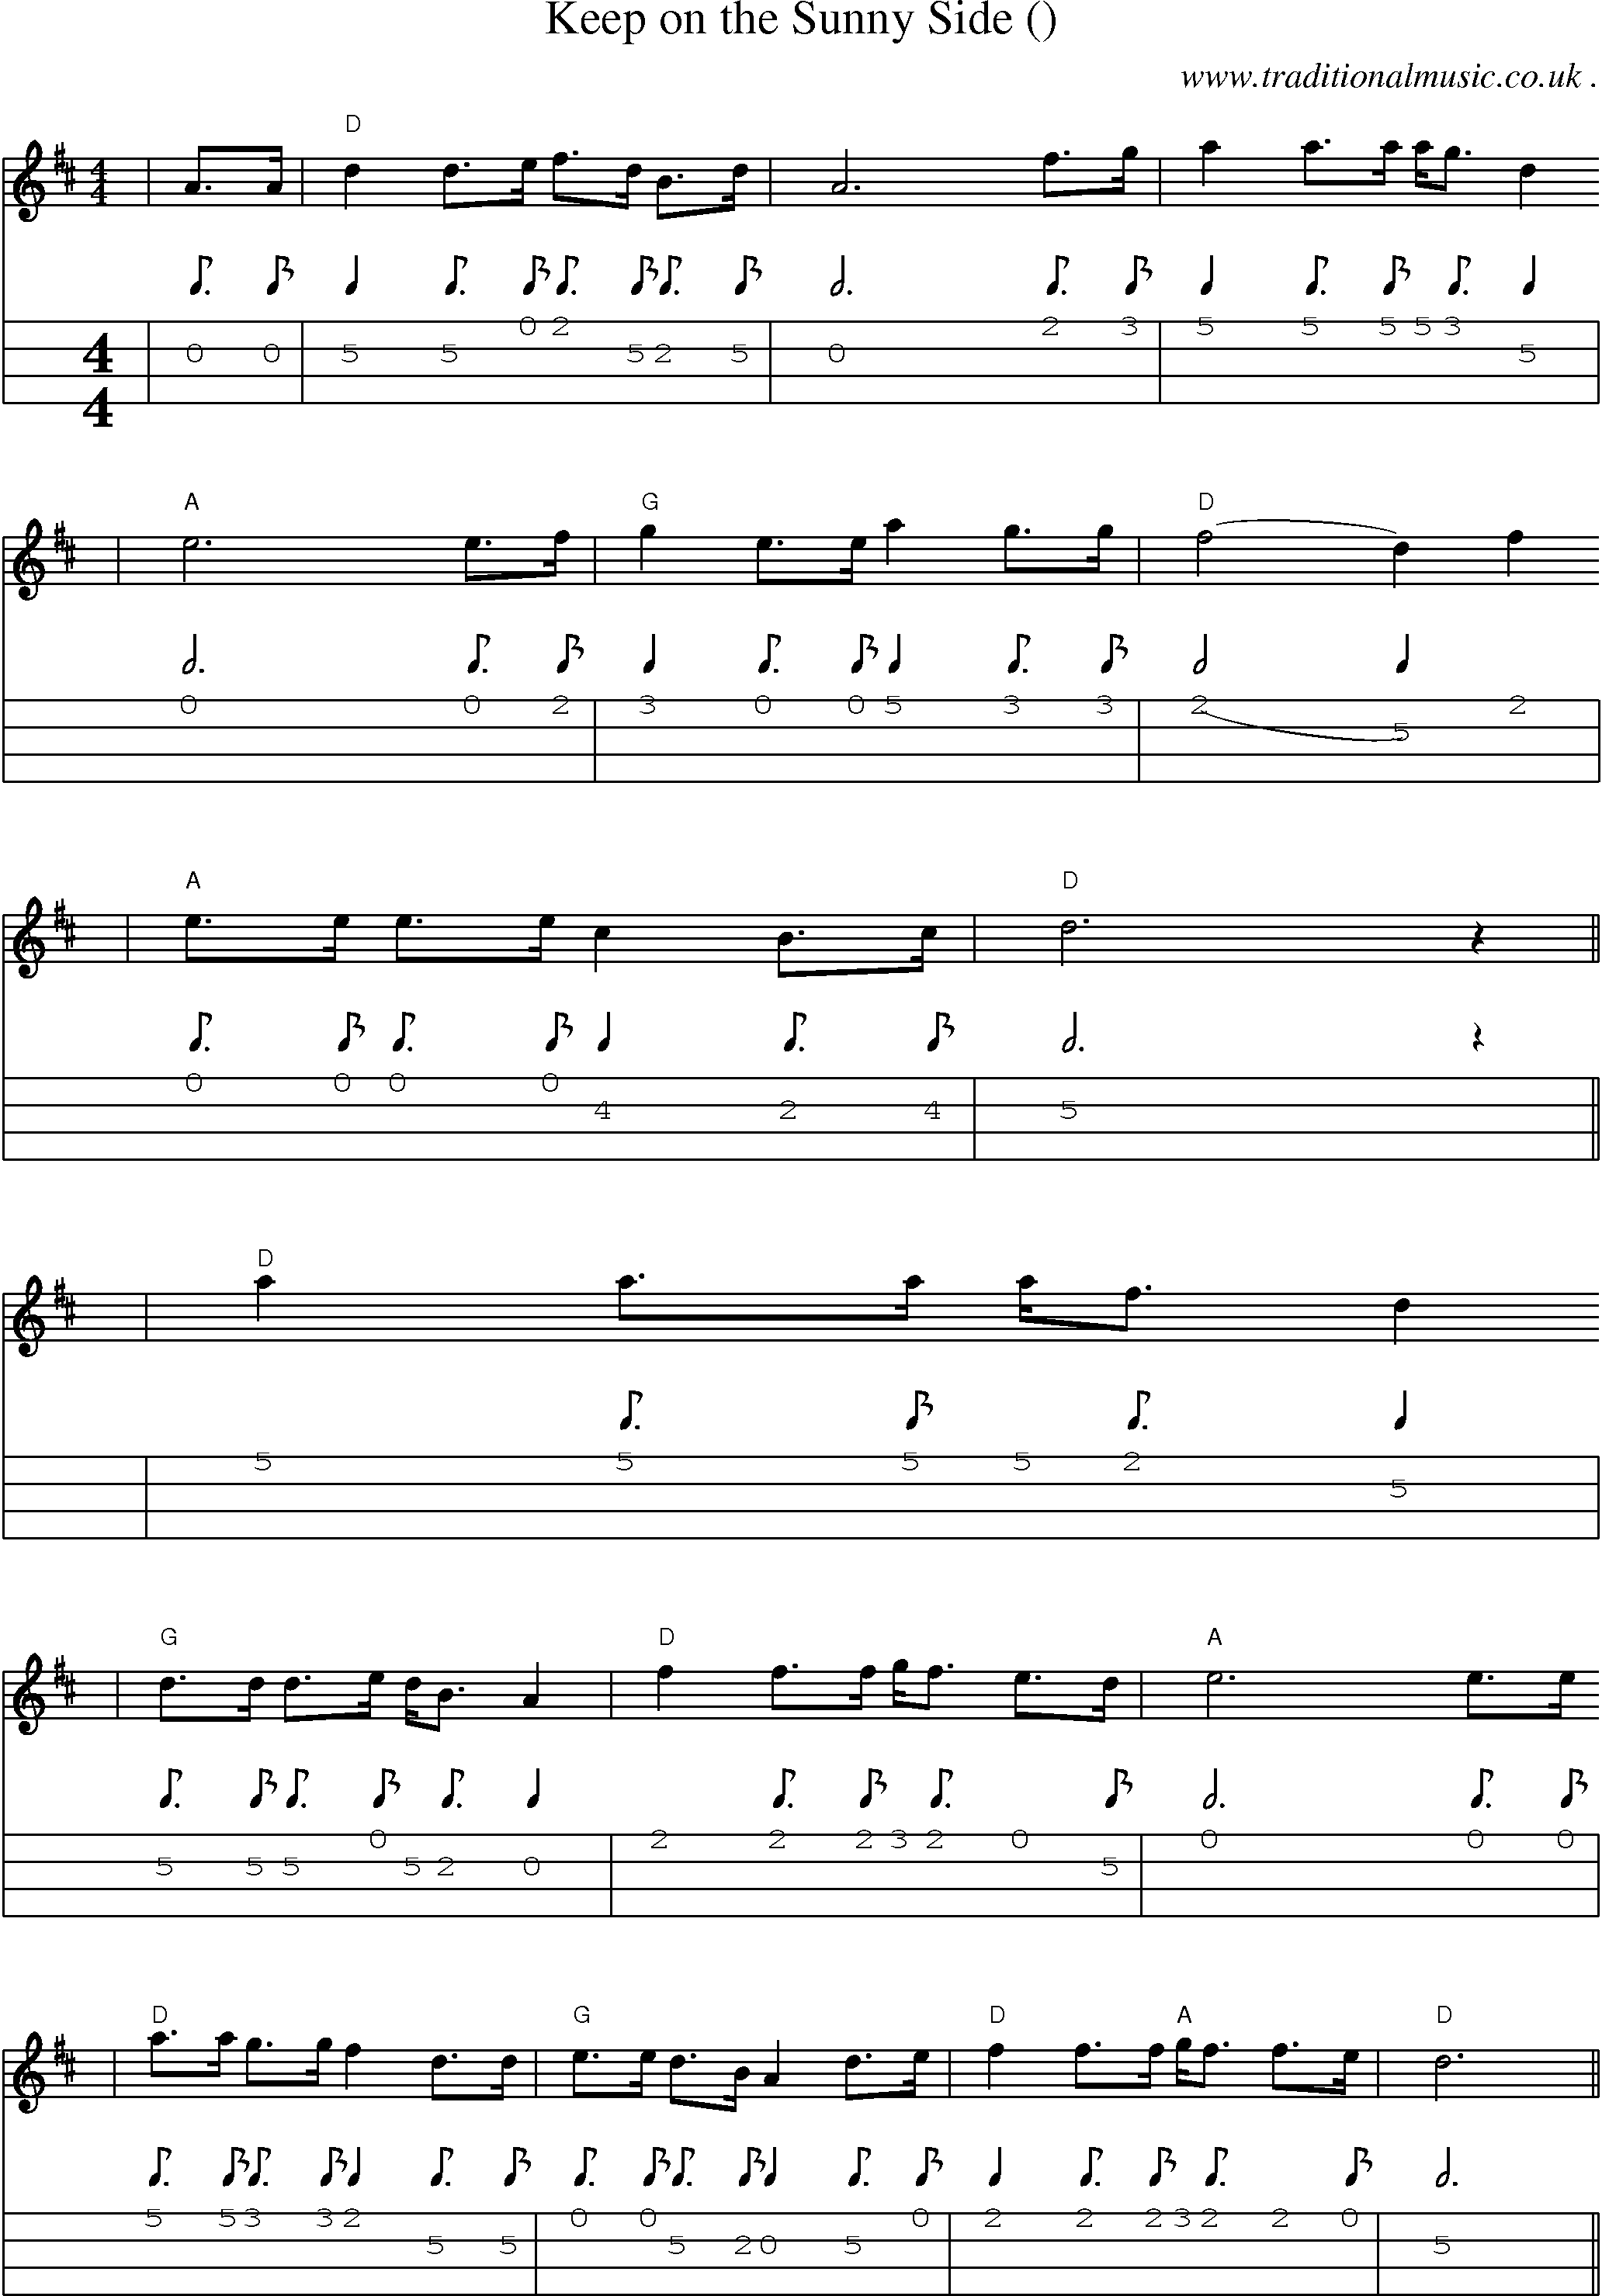 Music Score and Mandolin Tabs for Keep On The Sunny Side ()